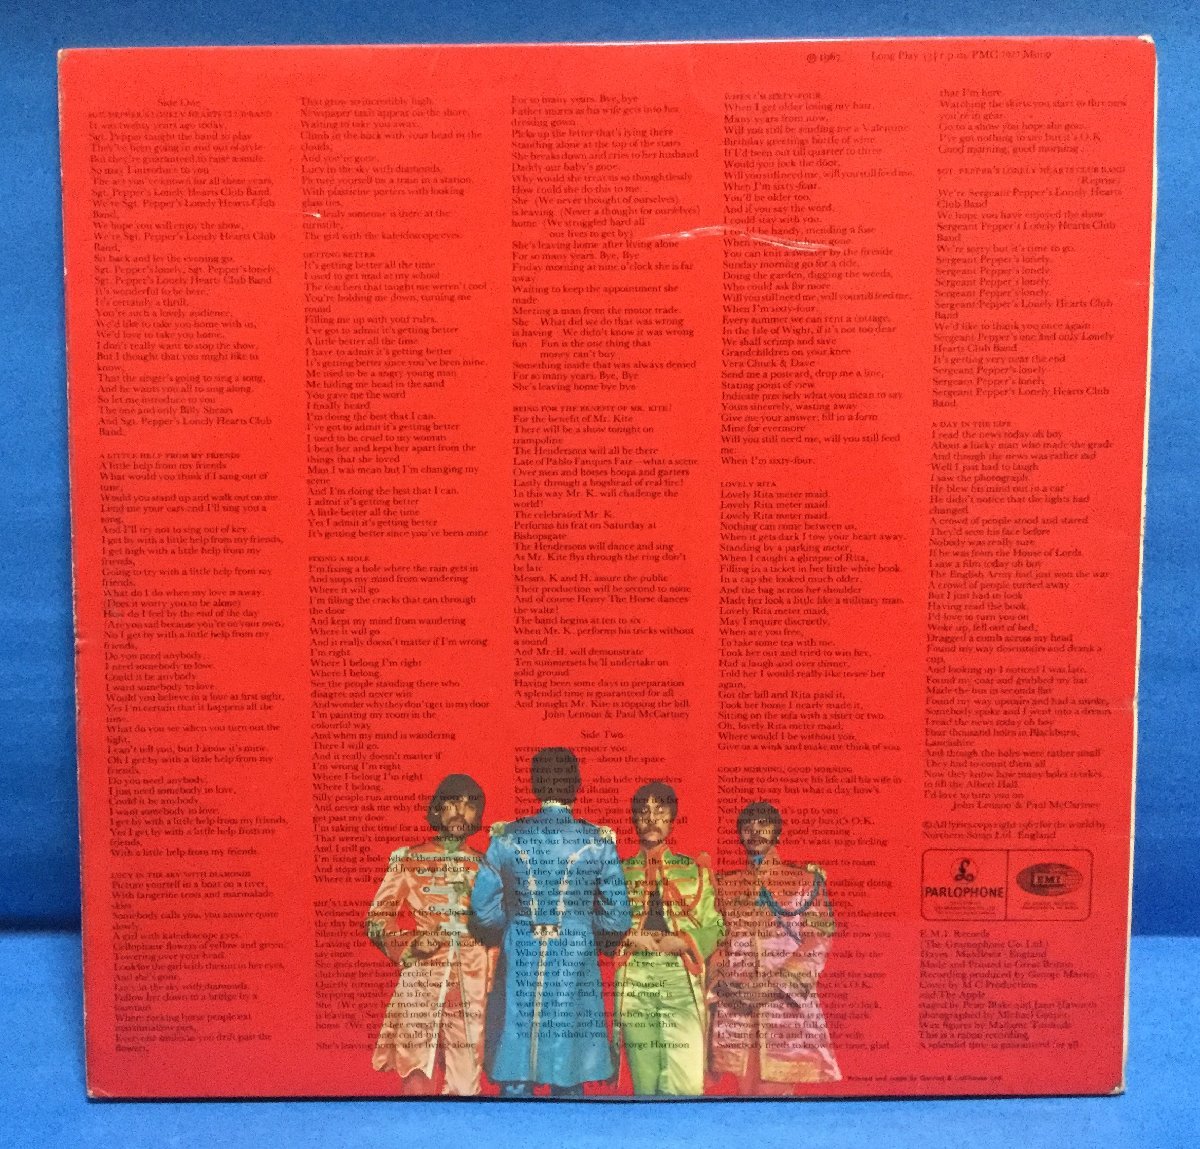 LP 洋楽 The Beatles / Sgt. Pepper's Lonely Hearts Club Band 英盤 mono 1/1 オリジナル_画像5